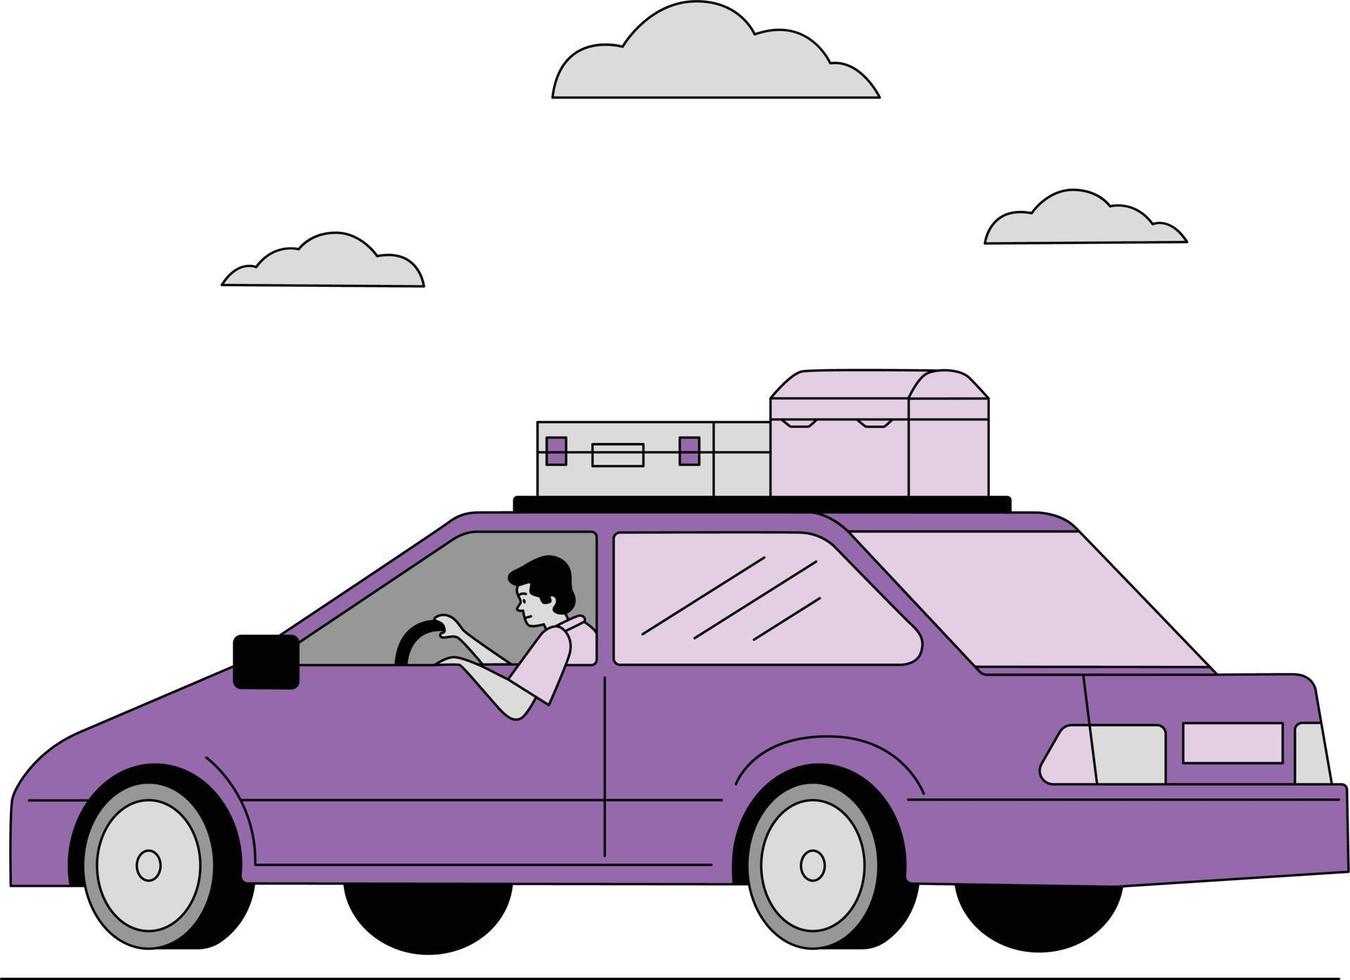 car on the road . Illustration of a man with suitcases on the roof of a purple car vector